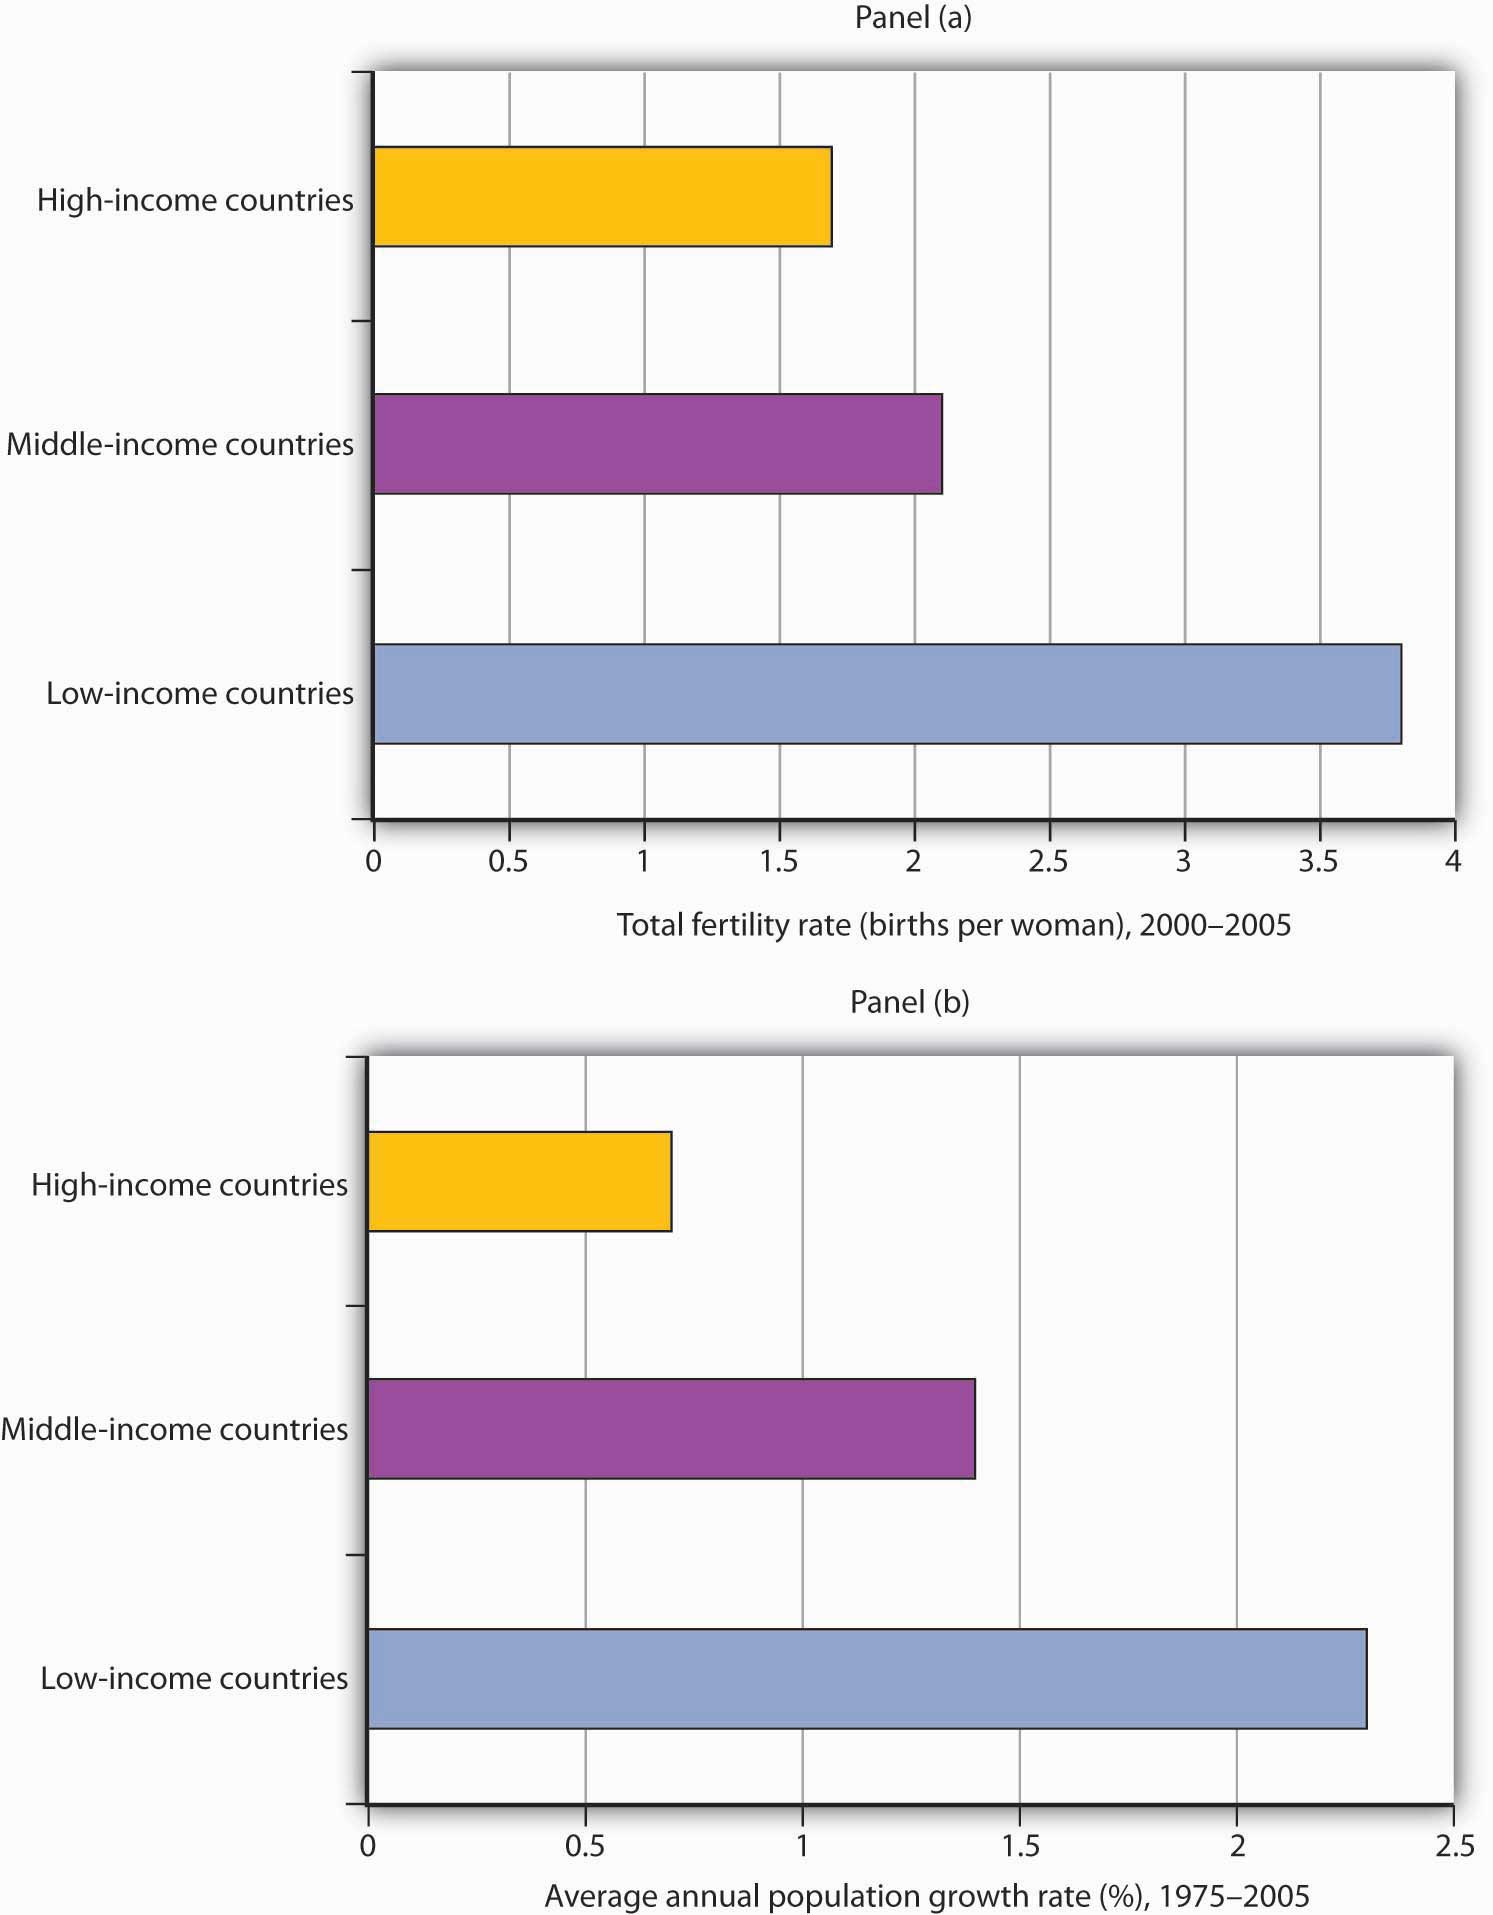 Income Levels and Population Growth. Panel (a) shows that low-income nations had much higher total fertility rates (births per woman) during the 2000–2005 period than did high-income nations. In Panel (b), we see that low-income nations had a much higher rate of population growth during the 1975–2005 period.